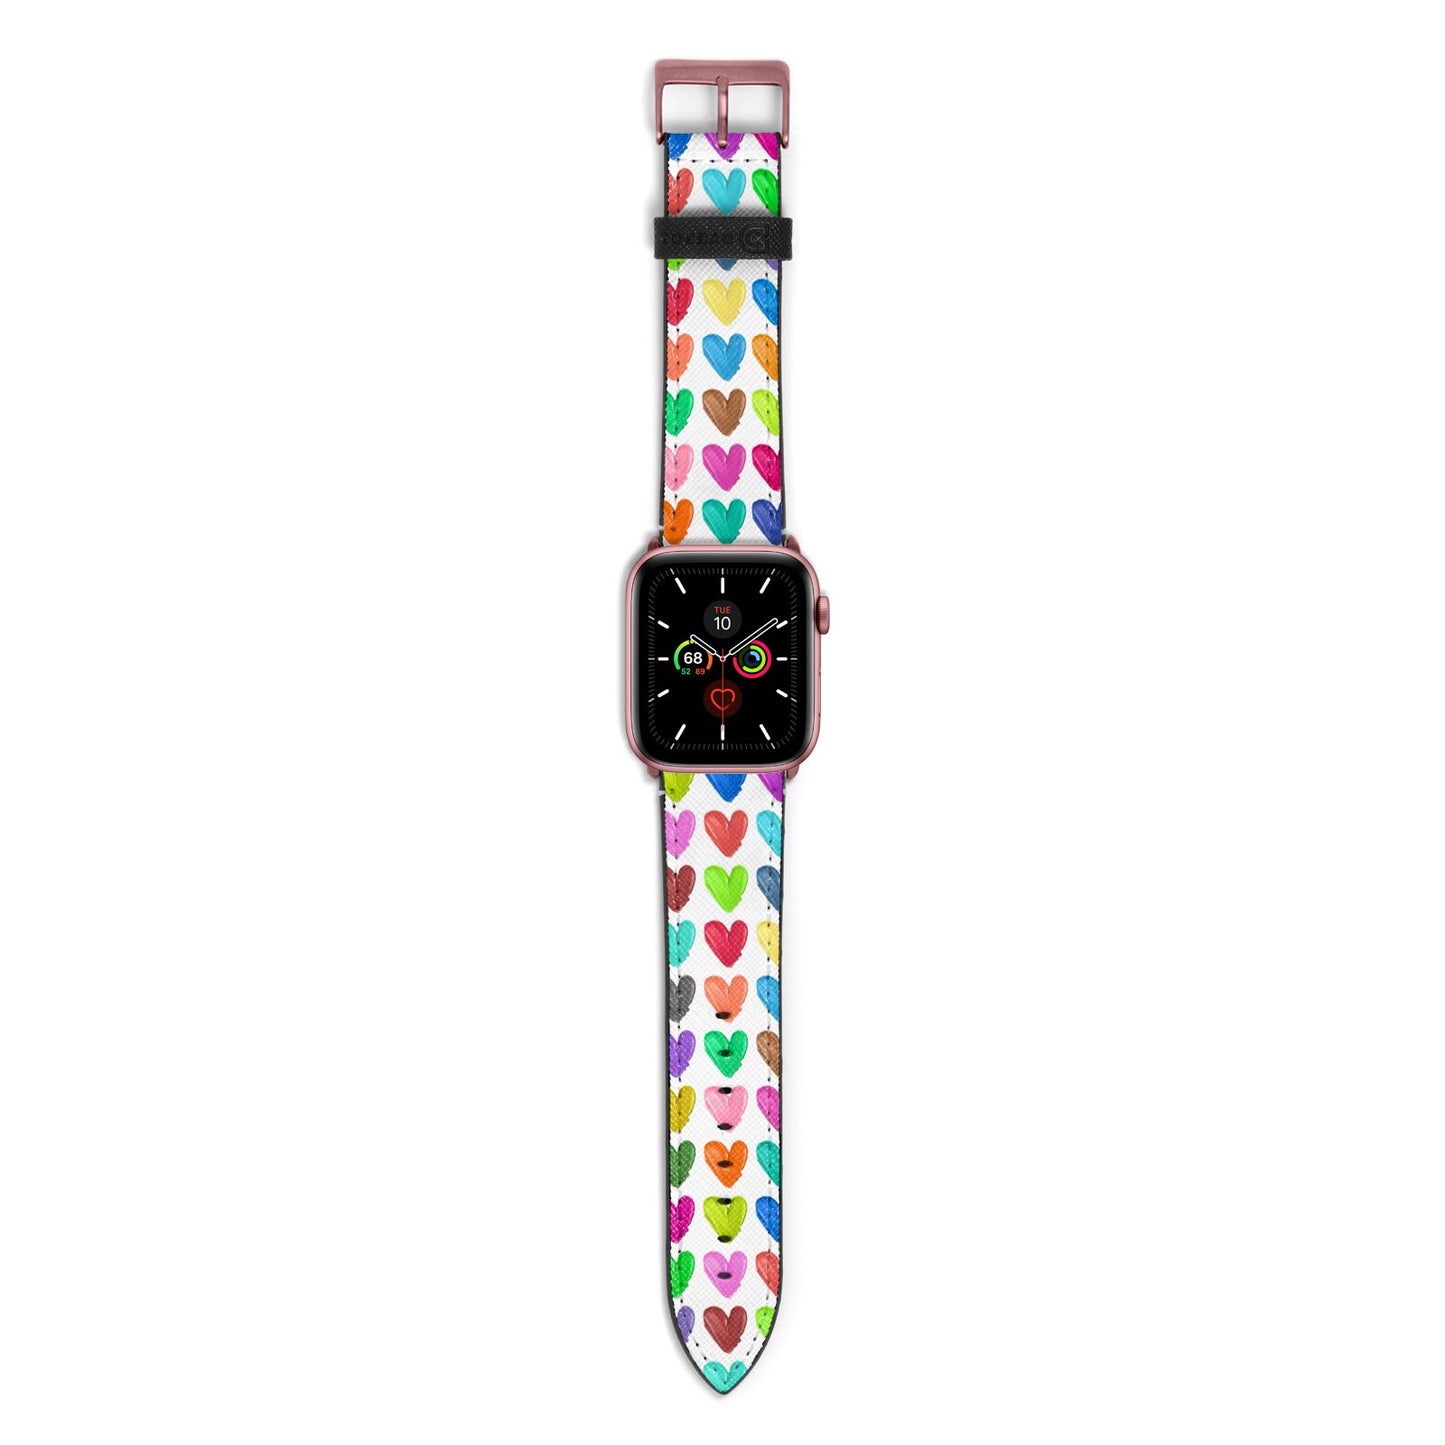 Polka Heart Apple Watch Strap with Rose Gold Hardware